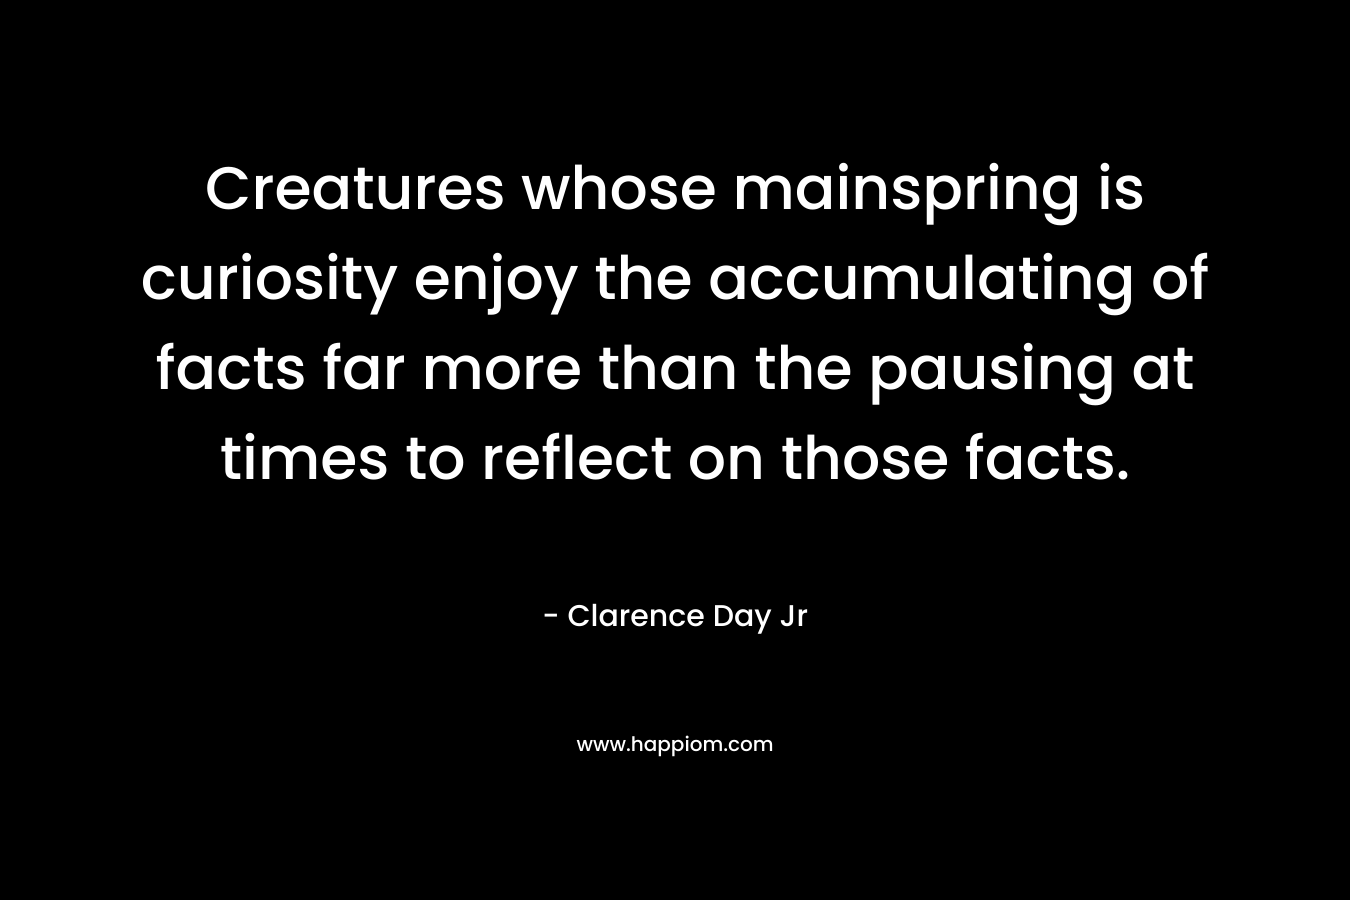 Creatures whose mainspring is curiosity enjoy the accumulating of facts far more than the pausing at times to reflect on those facts.